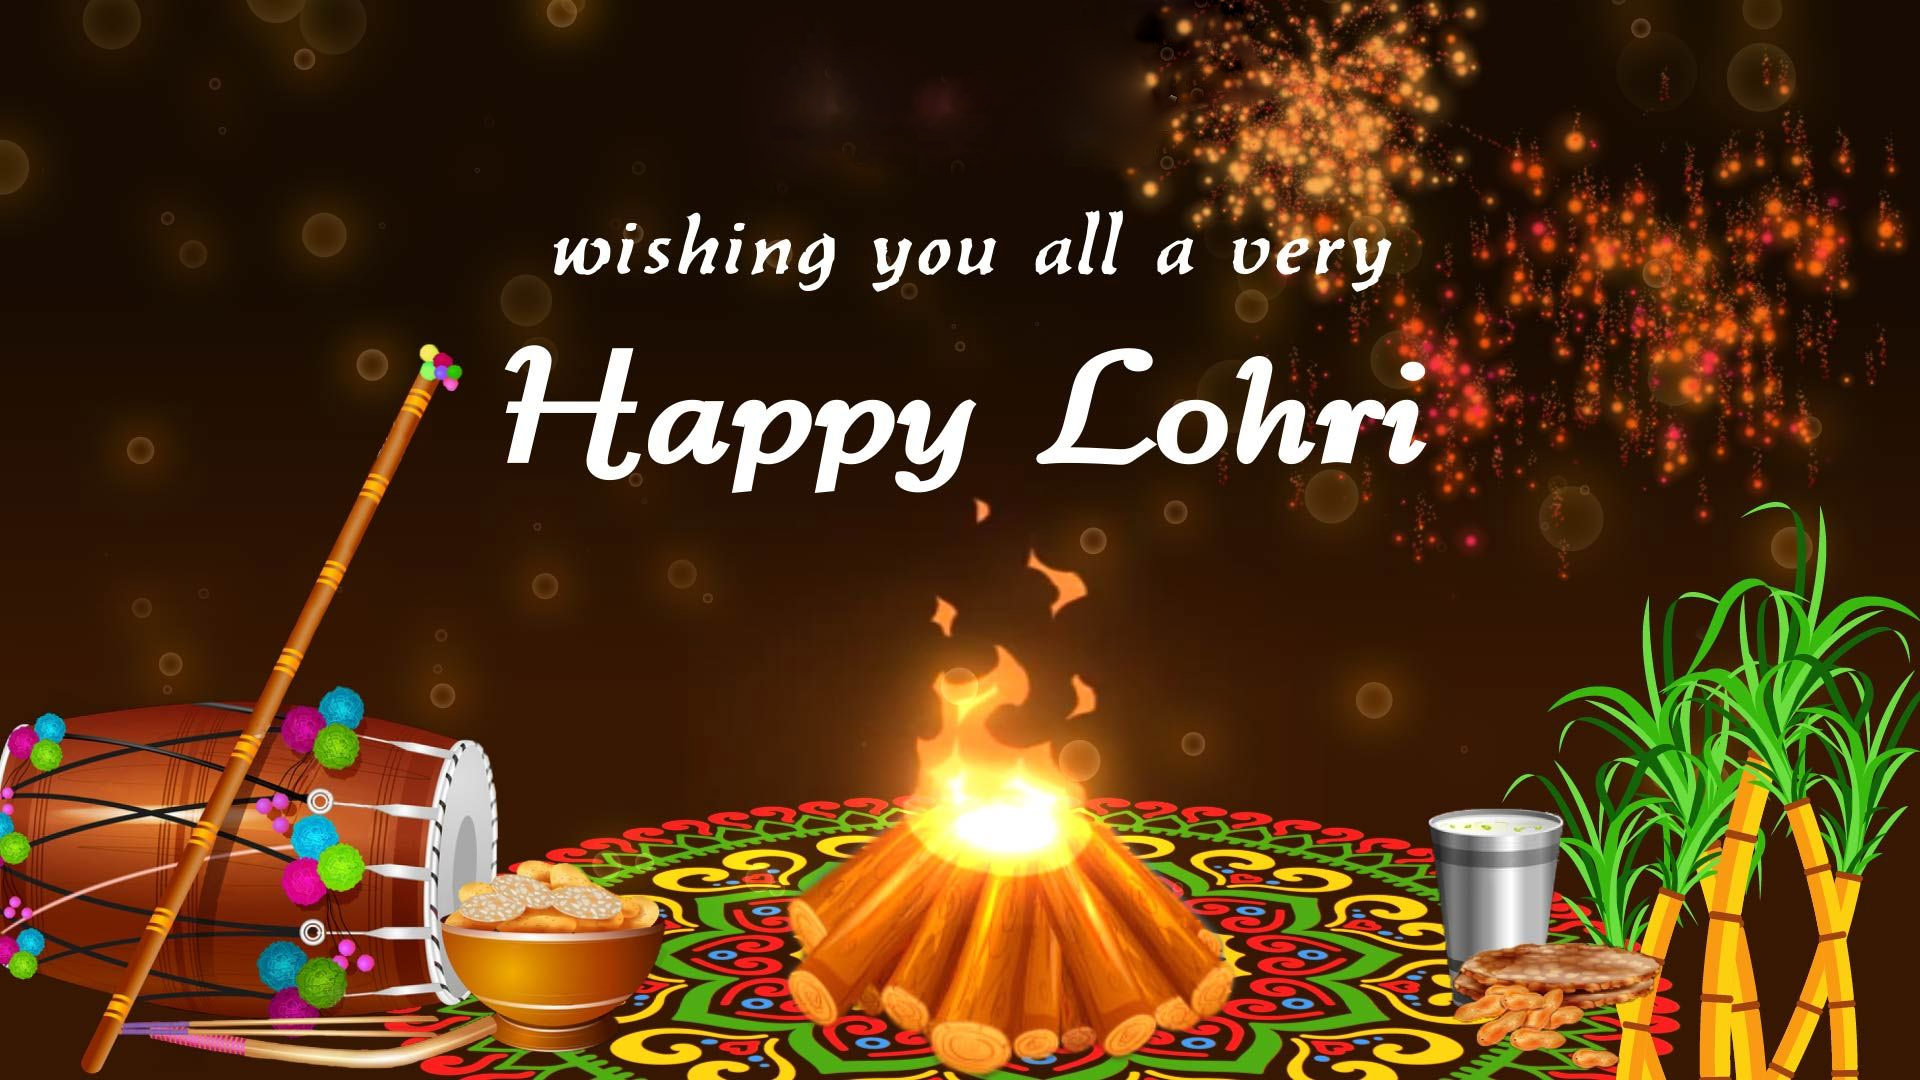 Happy Lohri Wishes Hd Wallpapers Download - God HD Wallpapers